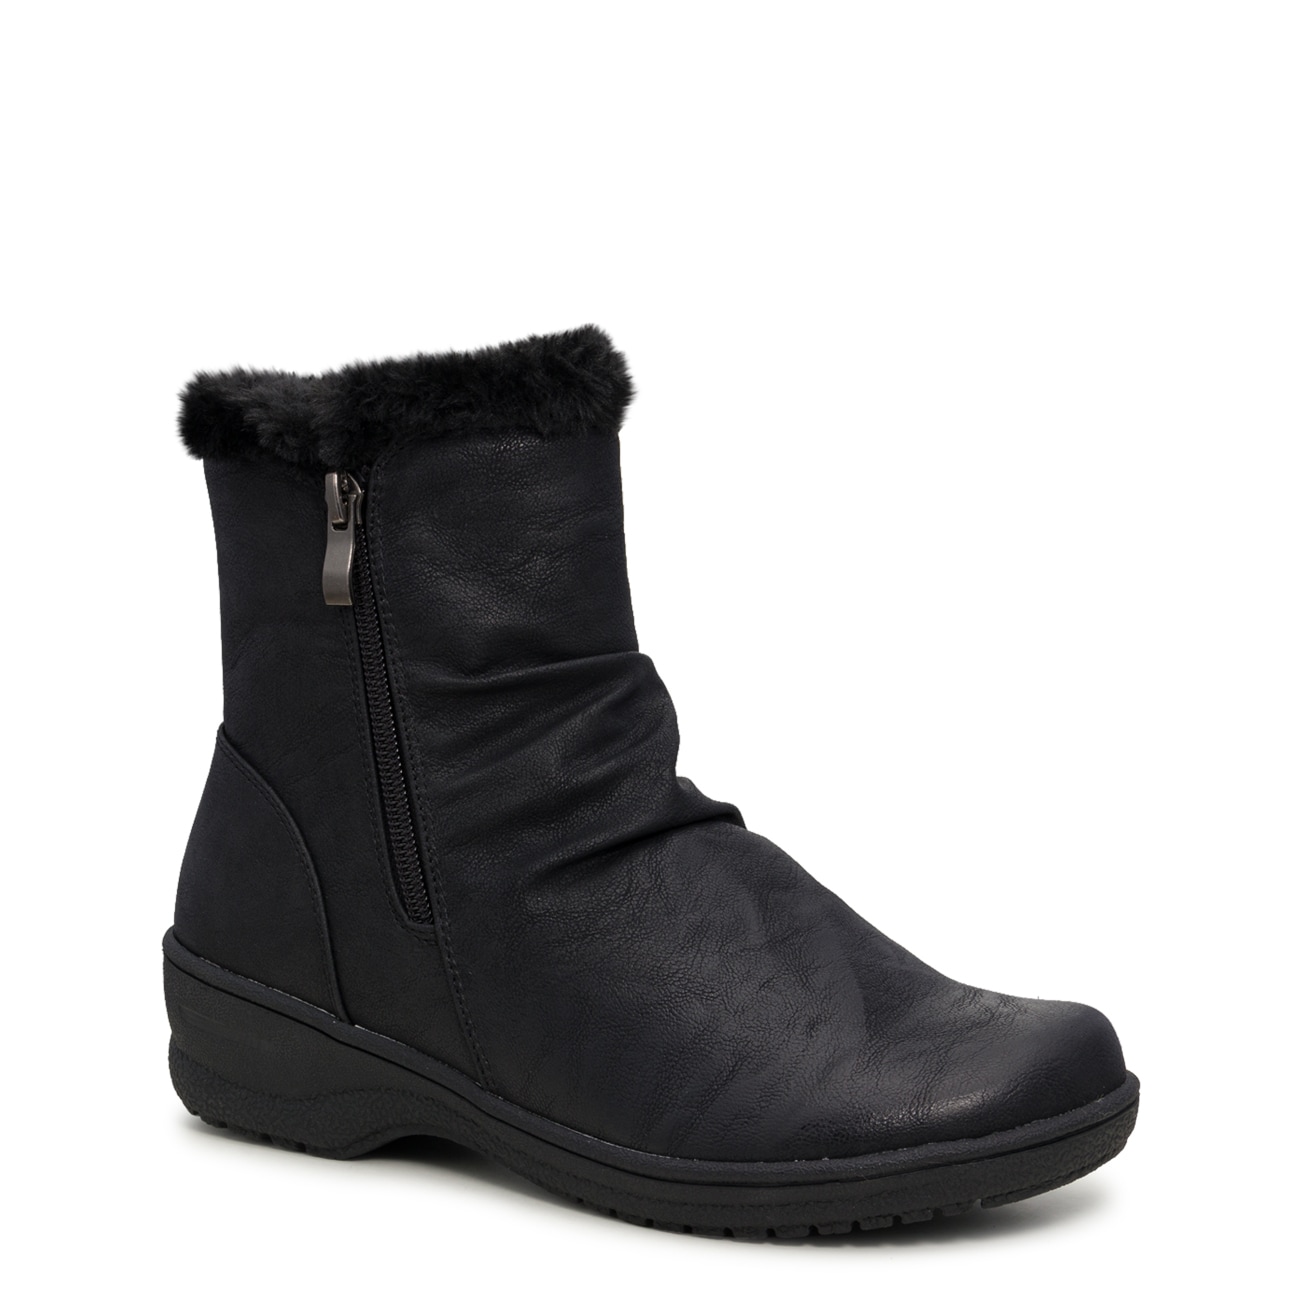 Women's Molly Mid Wide Winter Boot